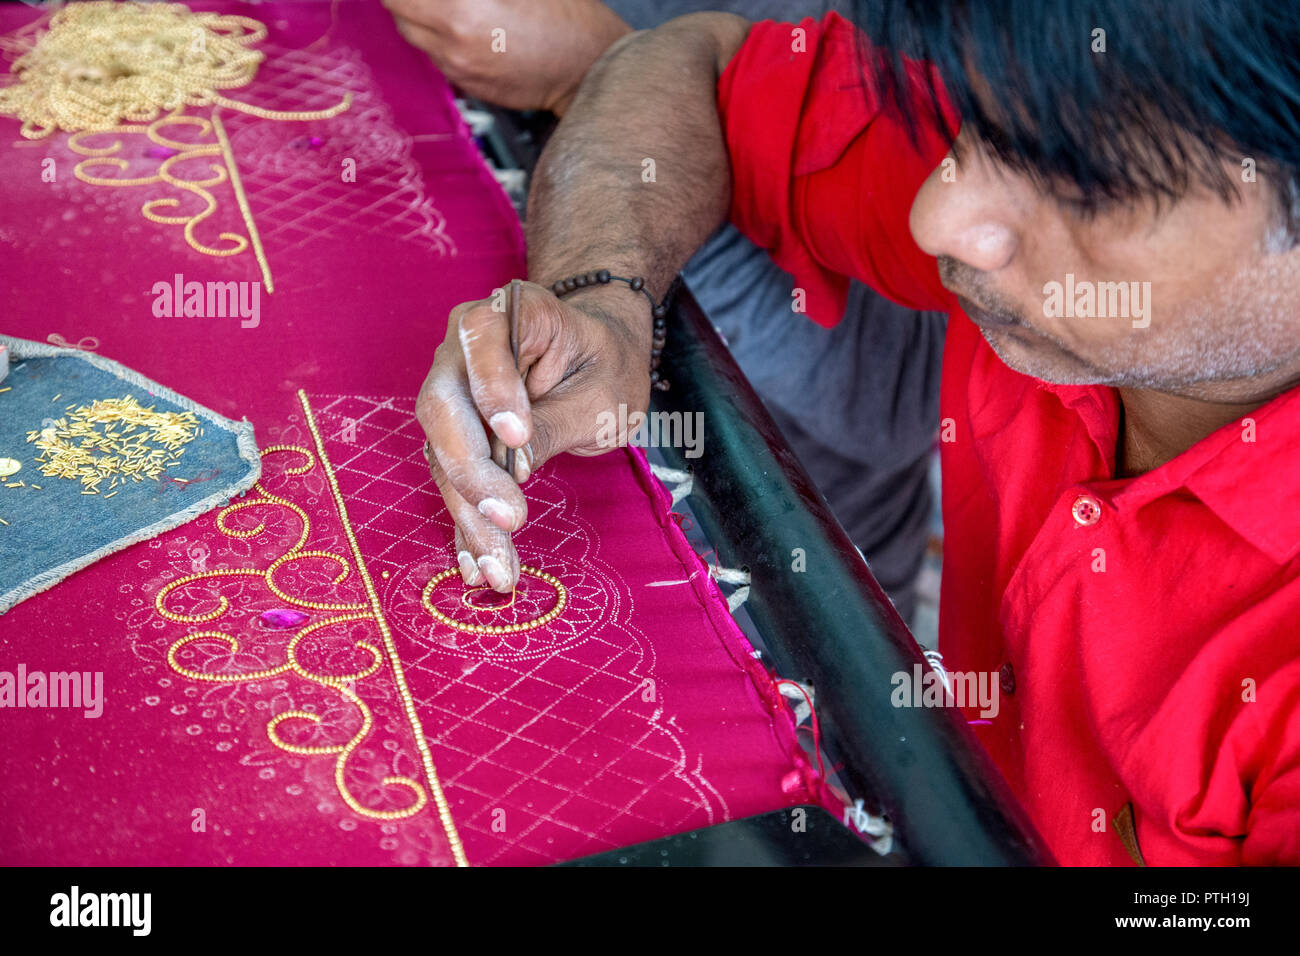 Craftsmen performing embroidery work on a Saree. Photographed in Ahmedabad, Gujarat, India Stock Photo